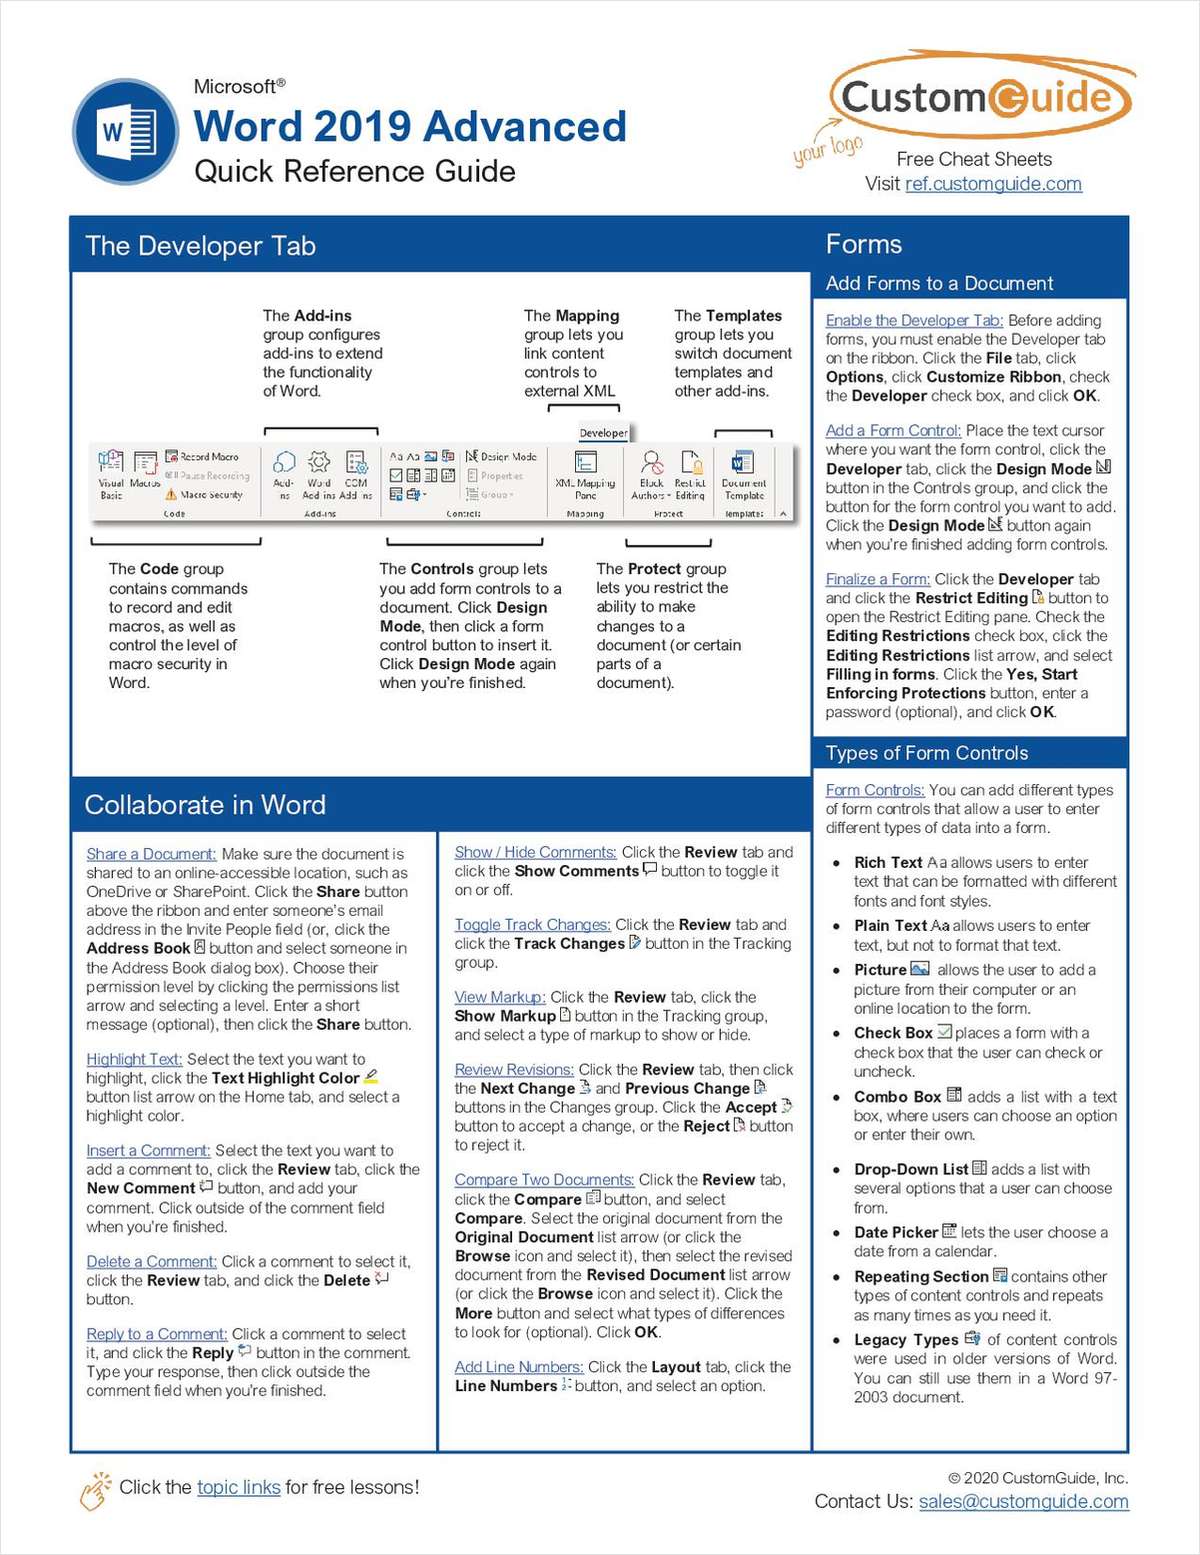 Microsoft Word 2019 Advanced -- Free Reference Card